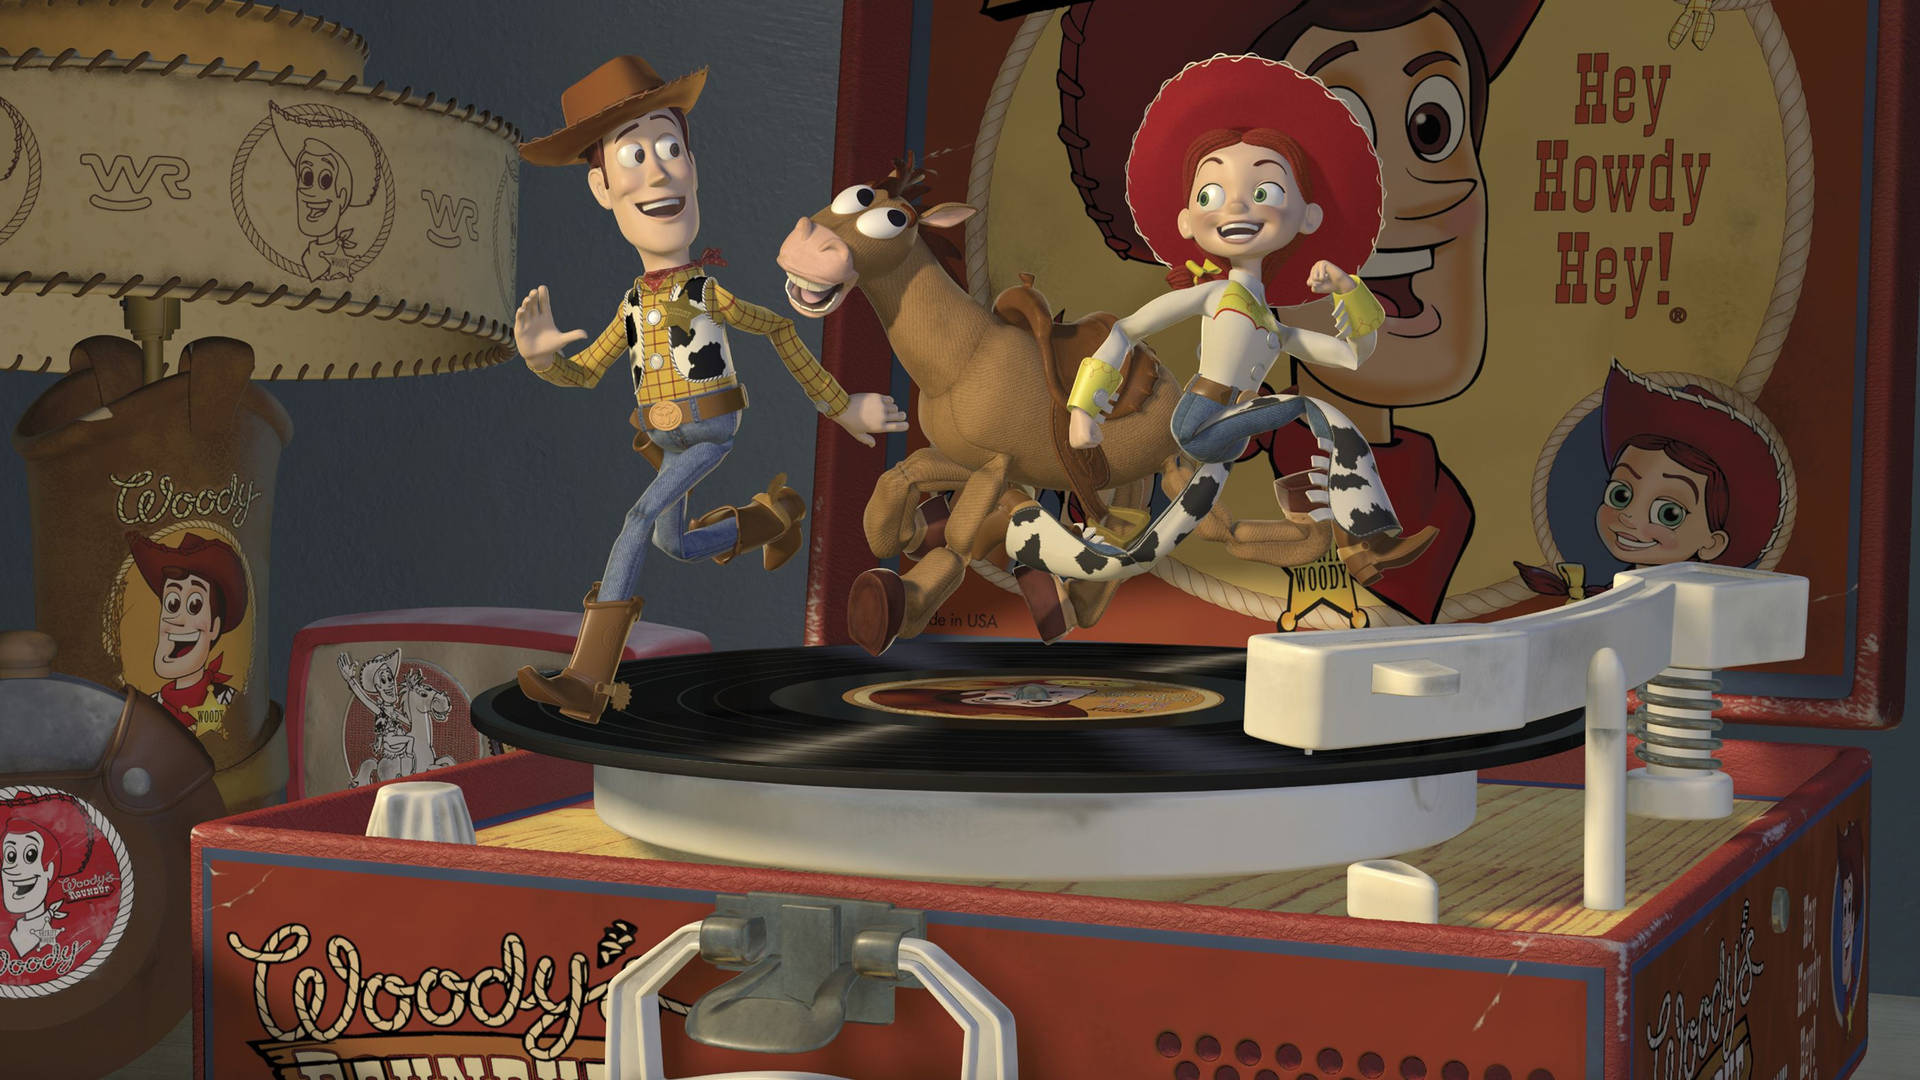 Cowboy And Cowgirl Toy Story 2 Wallpaper